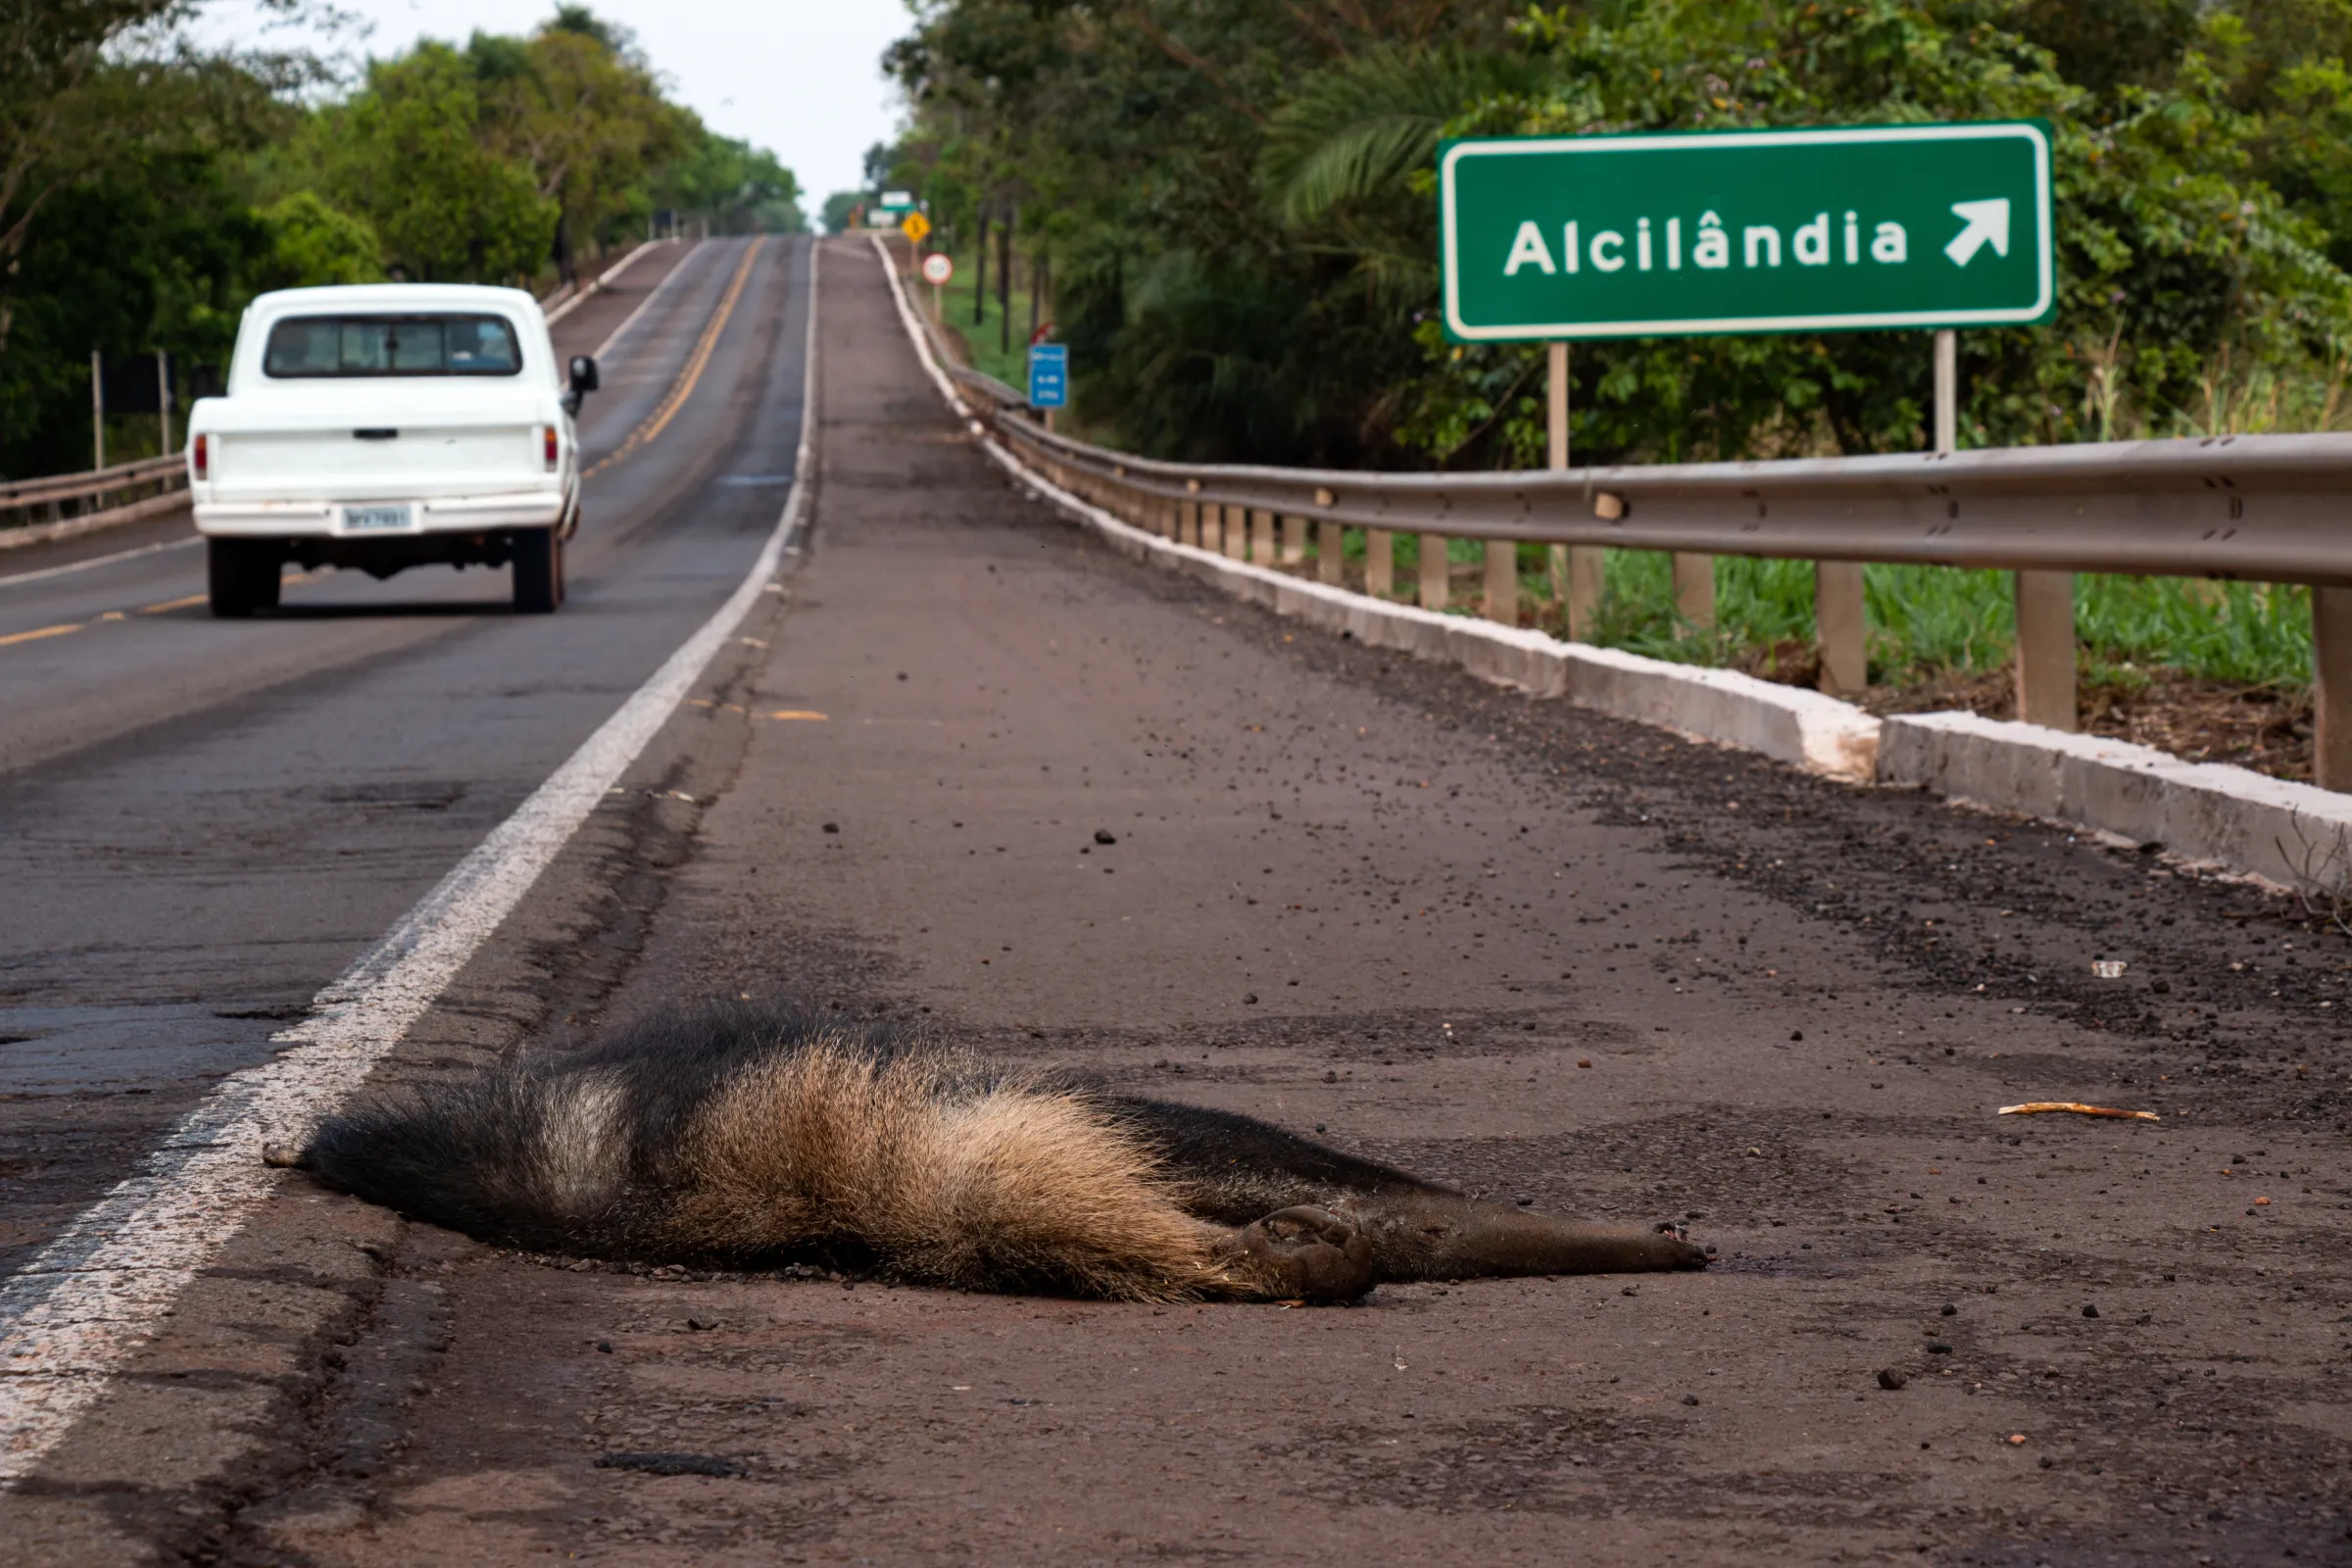 Dead giant anteater by road near Campo Grande, Mato Grosso do Sul state, Brazil, September, 15, 2022. Thomson Reuters Foundation/Henrique Kawaminami